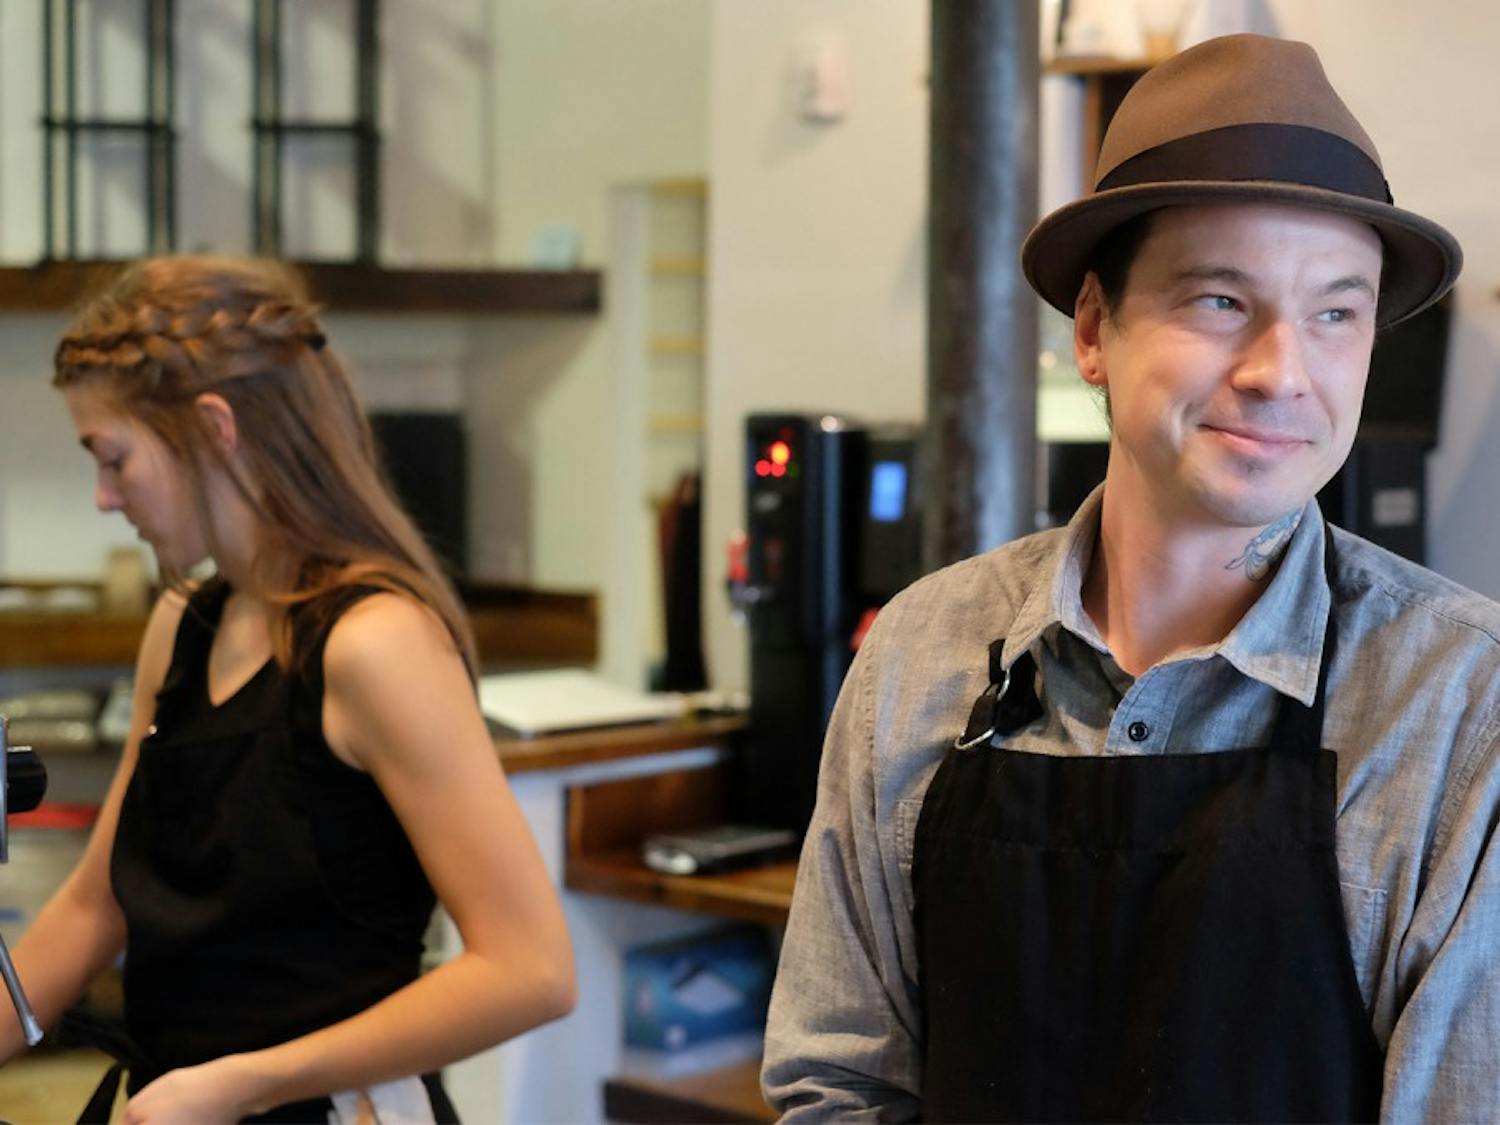 Shaw Sturton works alongside Laura Leech at Grey Squirrel, a new coffee show in Carrboro.